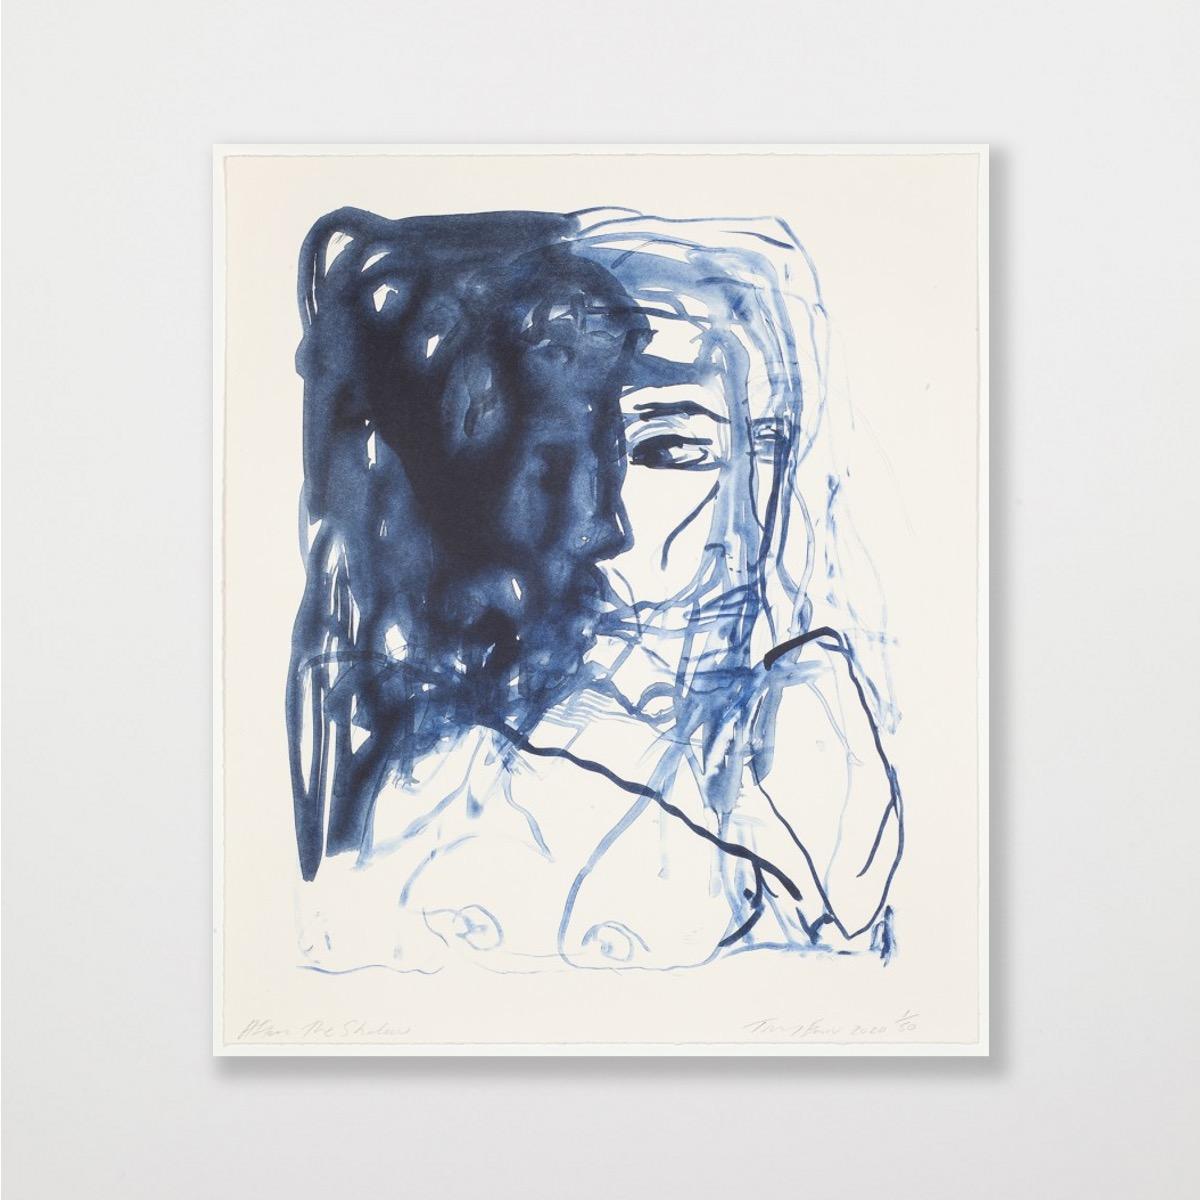 After The Shadow - Emin, Contemporary, YBAs, Lithograph, Blue, Portrait
2 colour lithograph on Somerset Velvet Warm White 400gsm
Edition of 50
65,5 x 55,5 cm (25.8 x 21.9 in)
Signed, numbered, and dated by the artist
In mint condition
With